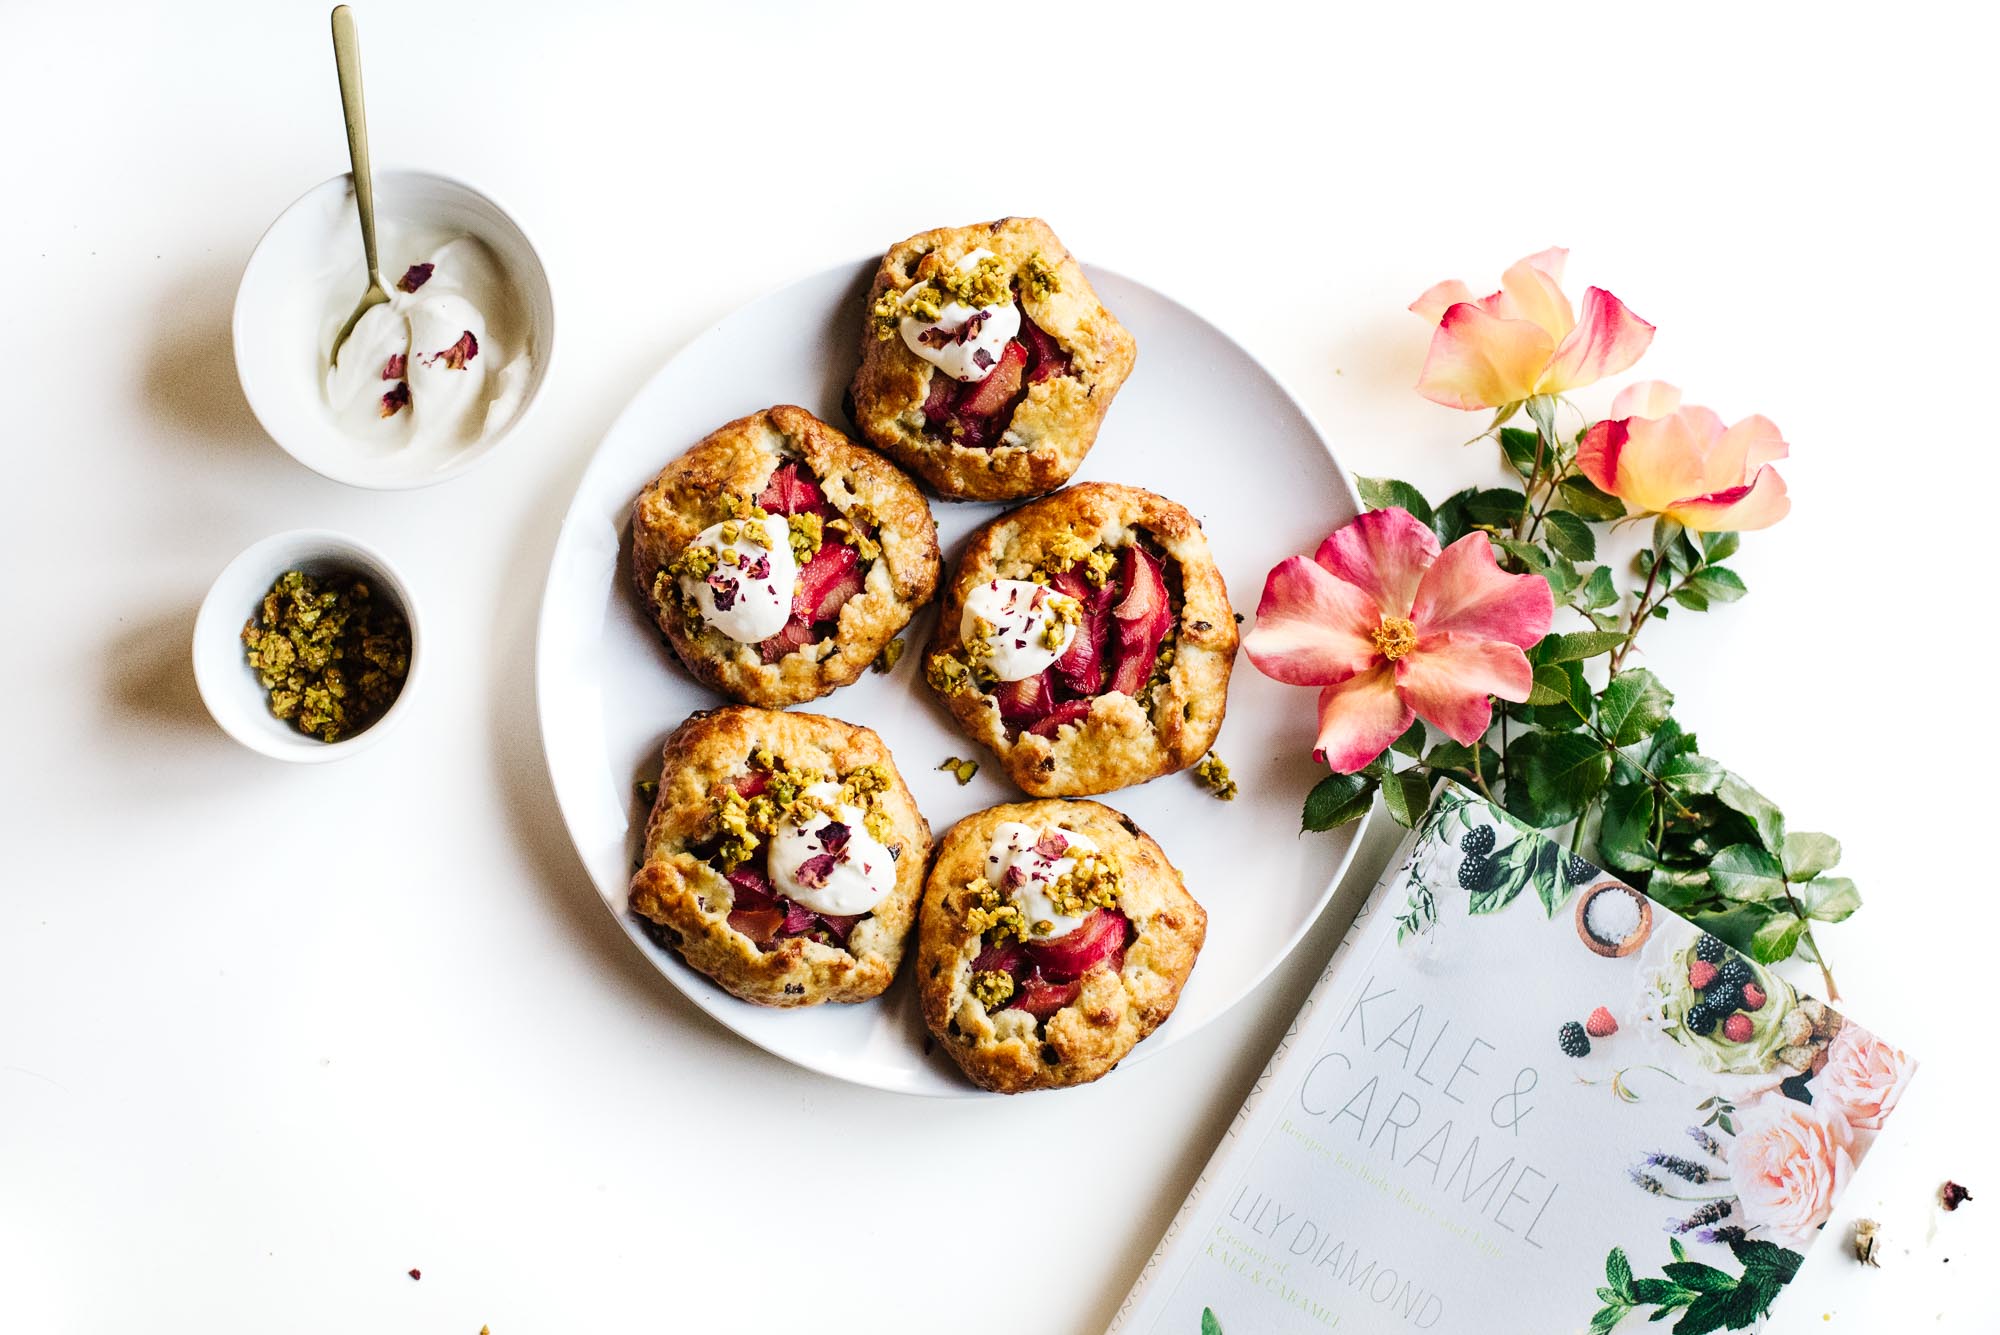 PISTACHIO ROSE RHUBARB GALETTES + MAMA LOVE NOTES: KALE & CARAMEL COOKBOOK FOR MOTHER’S DAY.